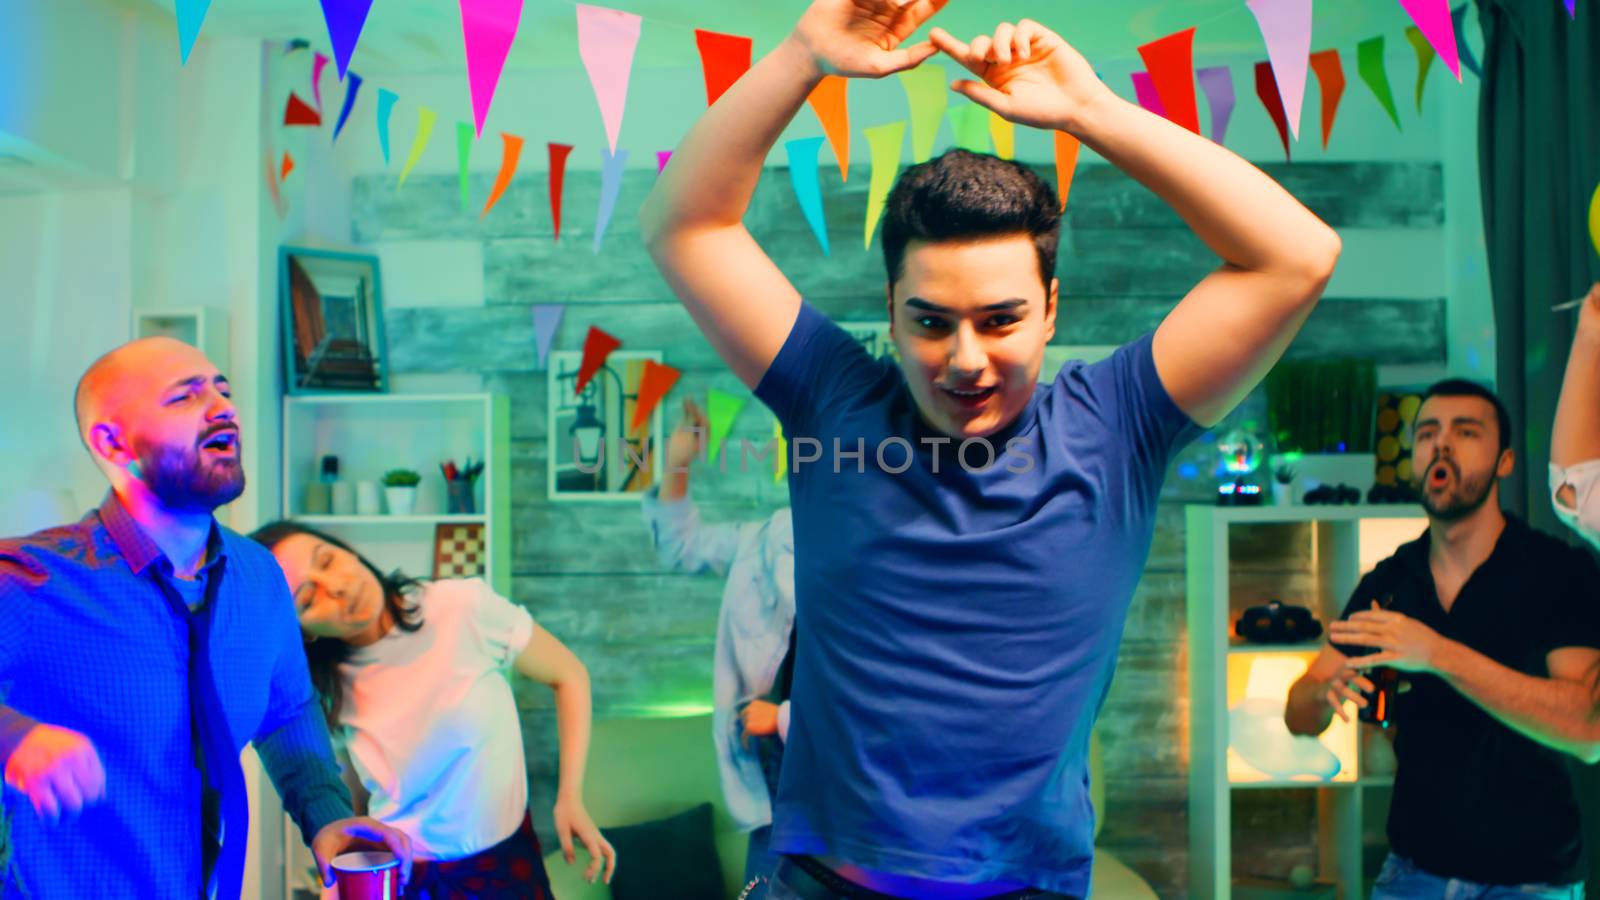 Cheerful young man dancing with his hands up at the party with his friends in an apartment with neon lights.